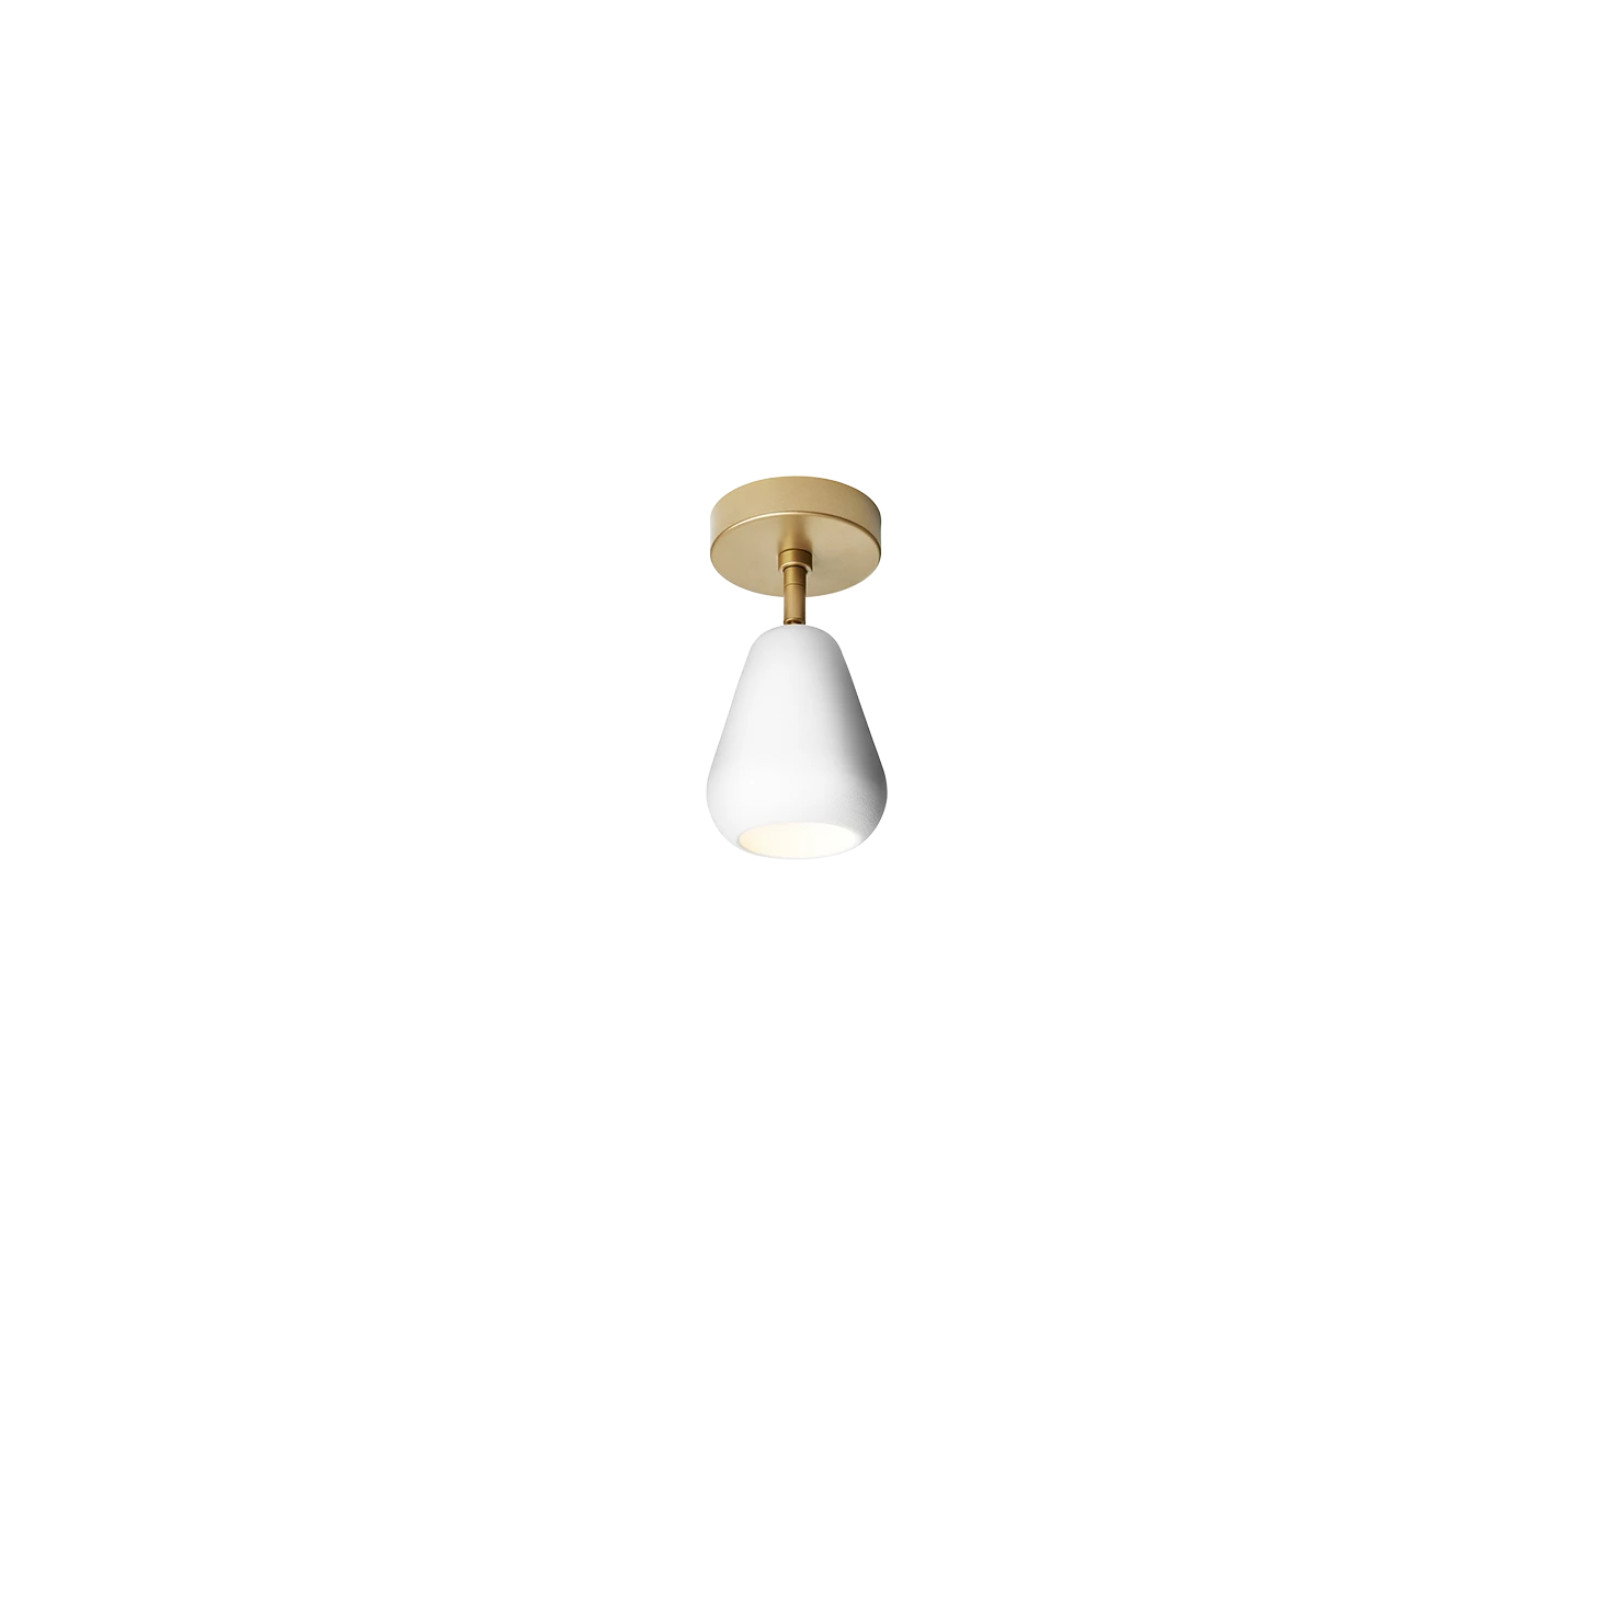 NUURA Anoli Wall and Ceiling LightNordic White and Gold